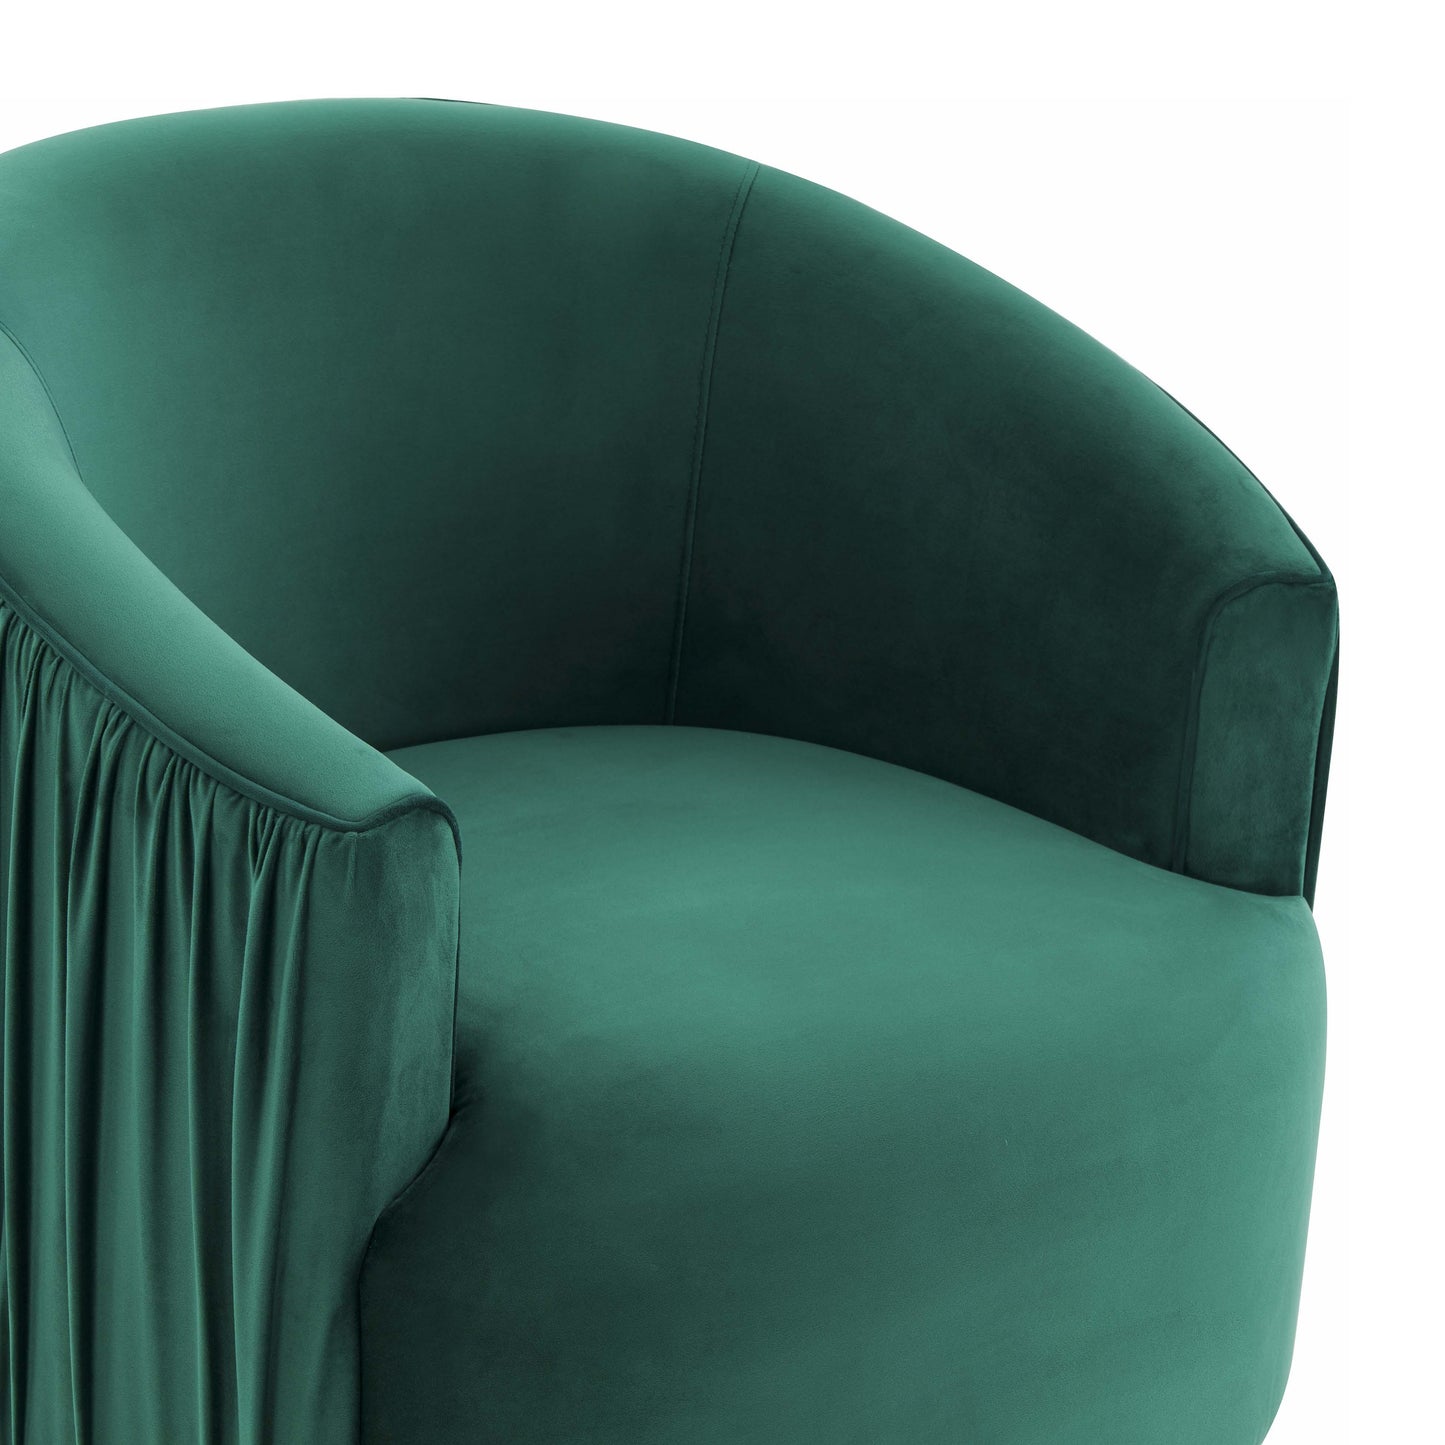 London Forest Green Pleated Swivel Chair by TOV